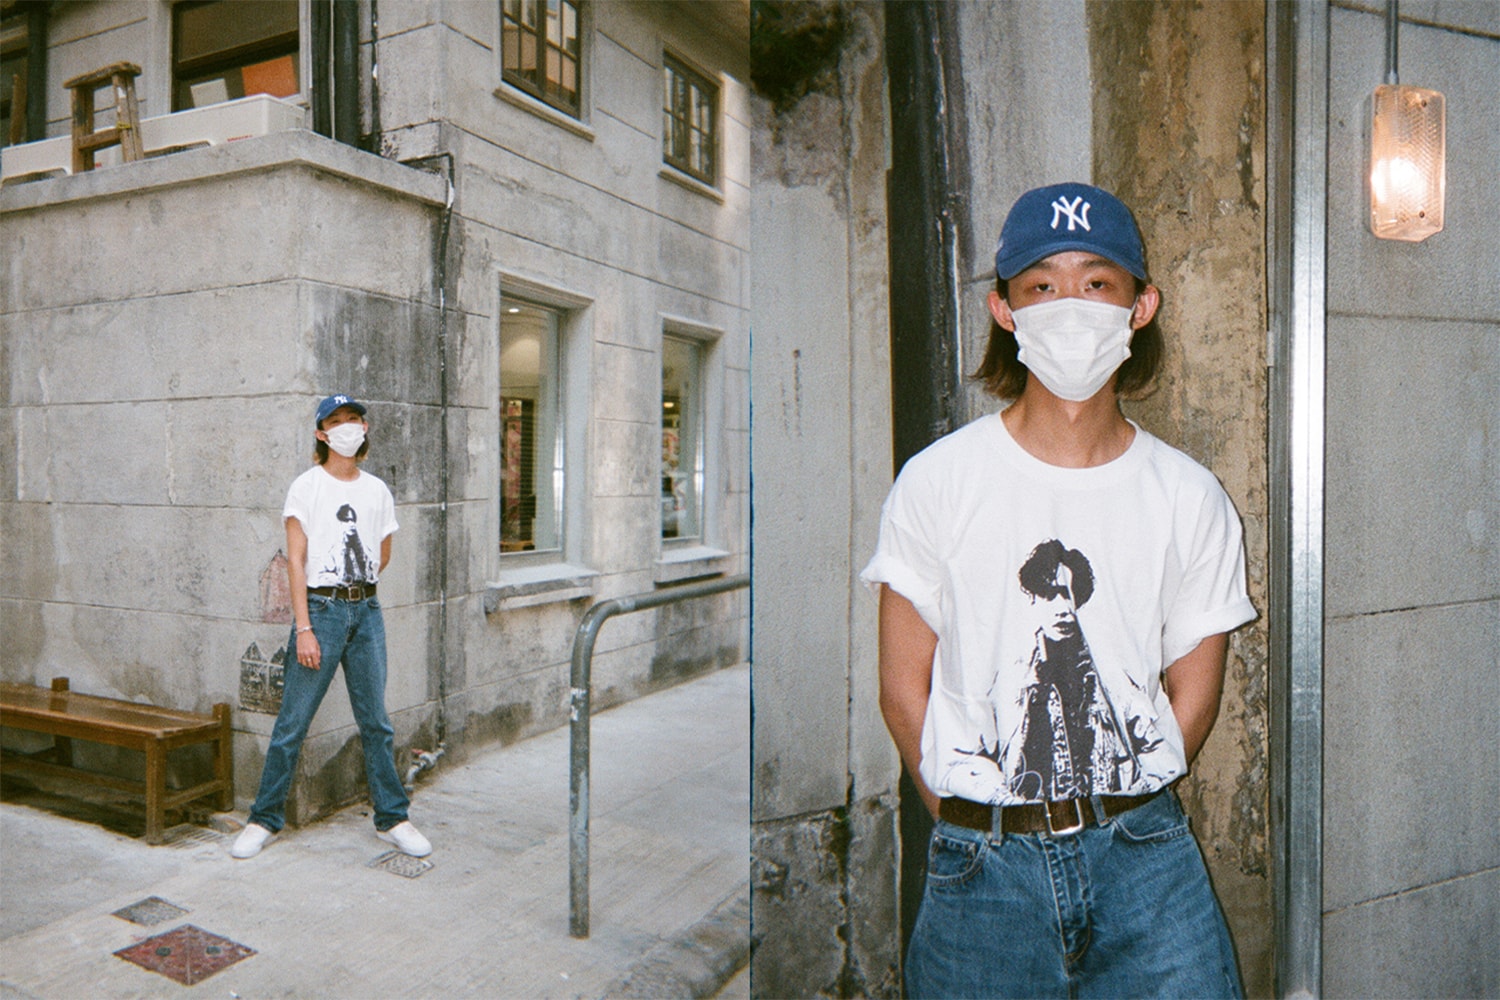 RAW EMOTIONS Spring Summer 2020 Collection Release T shirt Hong Kong Movie